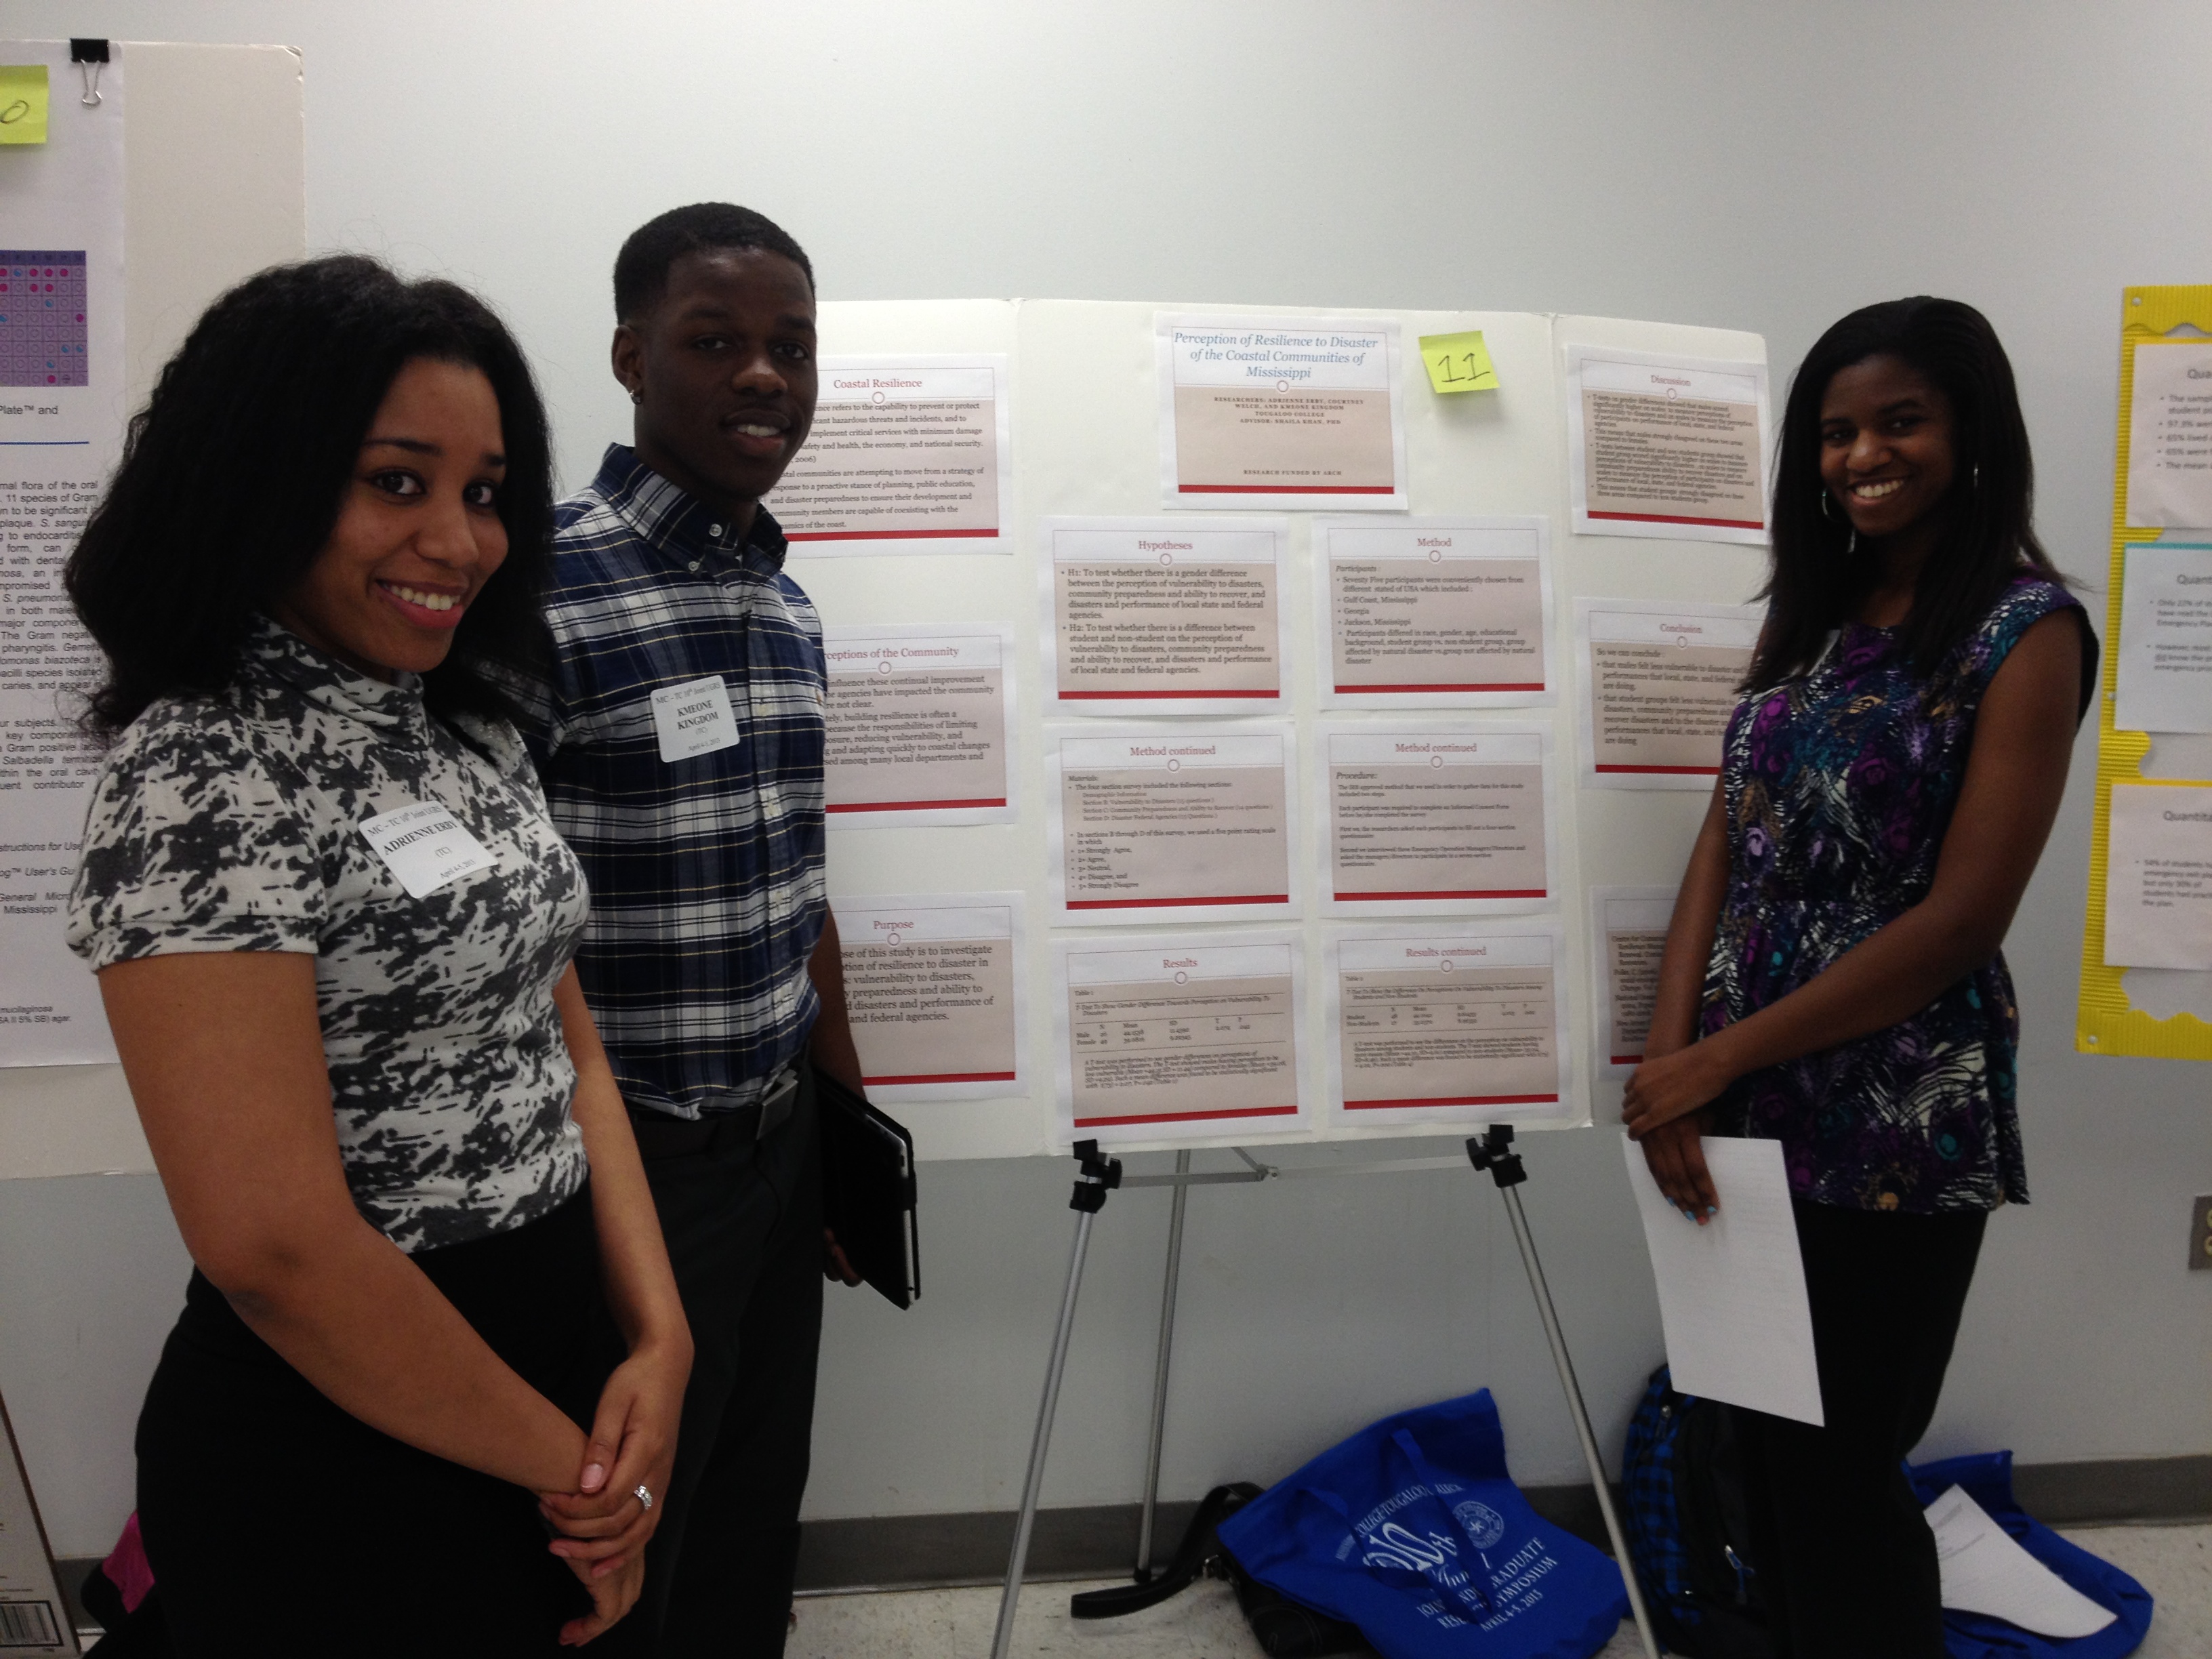 Dr. Khan's DCS Research Group